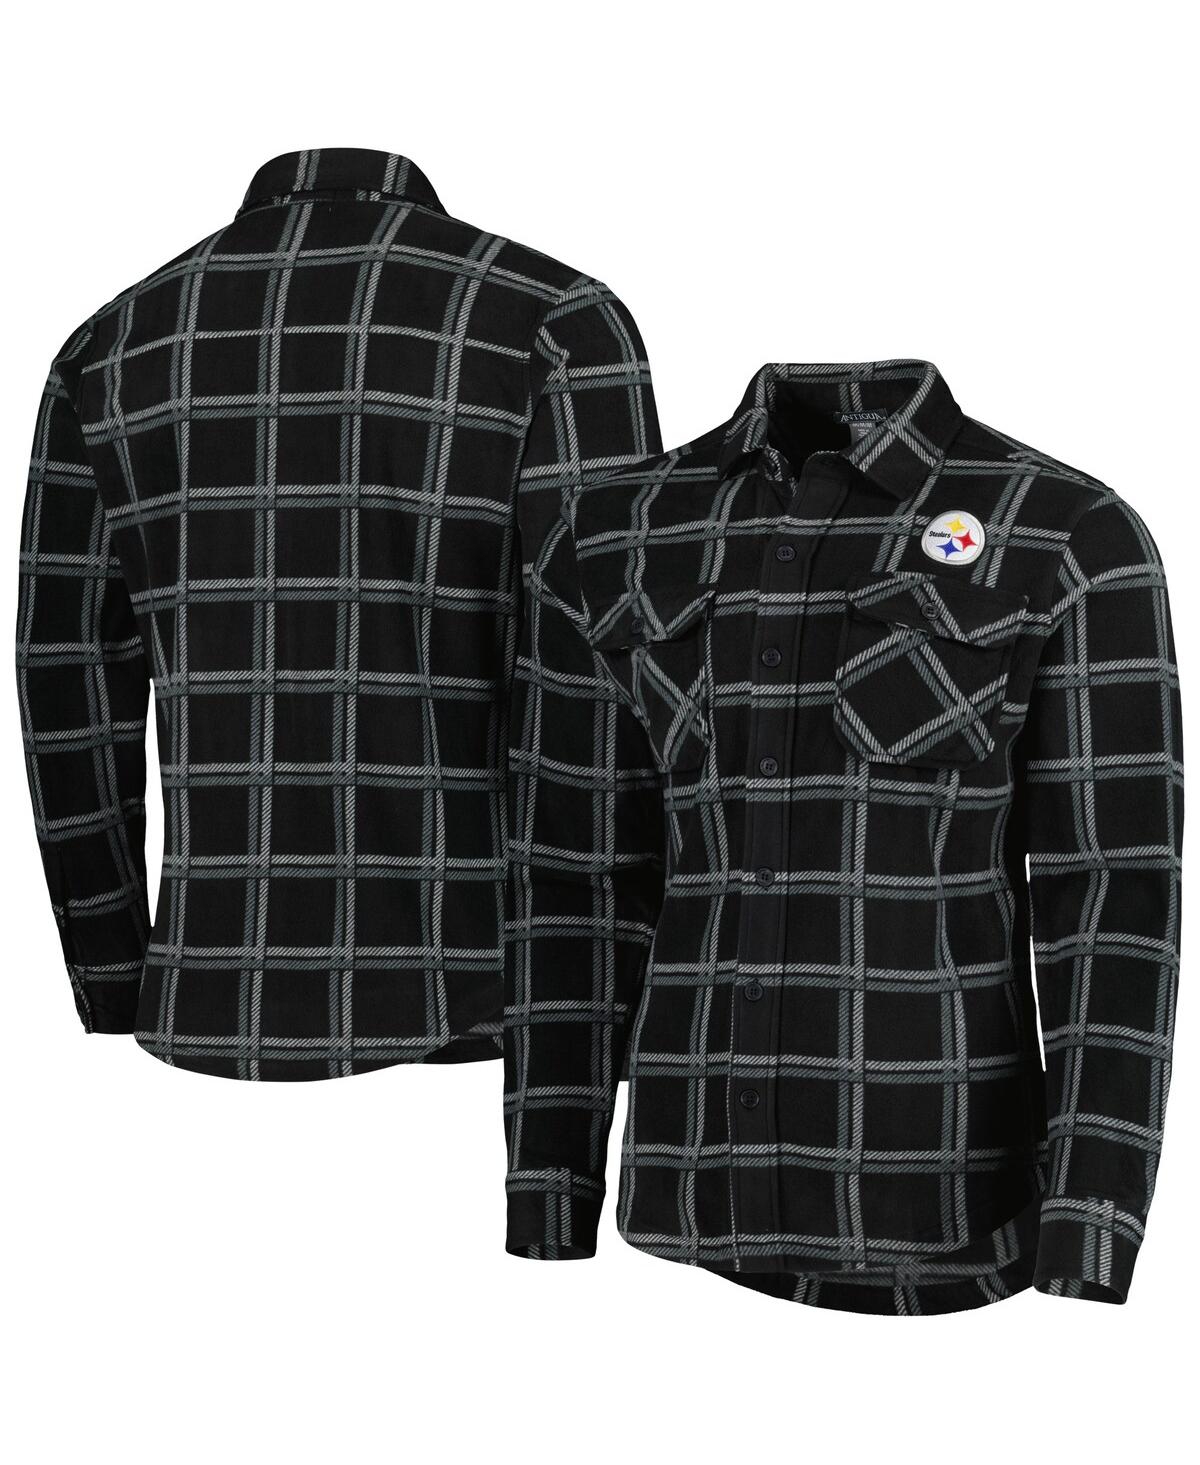 Men's Antigua Black Pittsburgh Steelers Industry Flannel Button-Up Shirt Jacket - Black